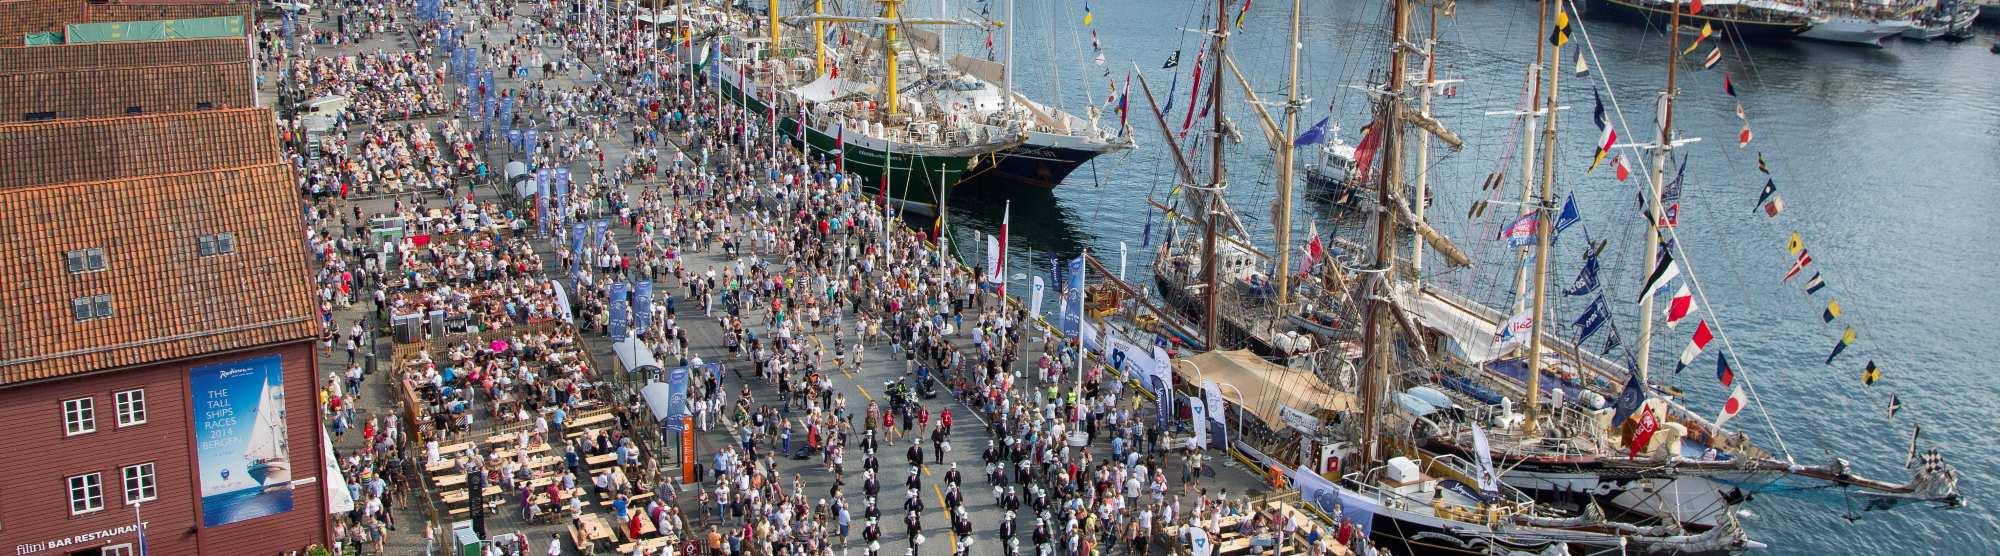 Planning major events in Bergen - The Tall Ships Race